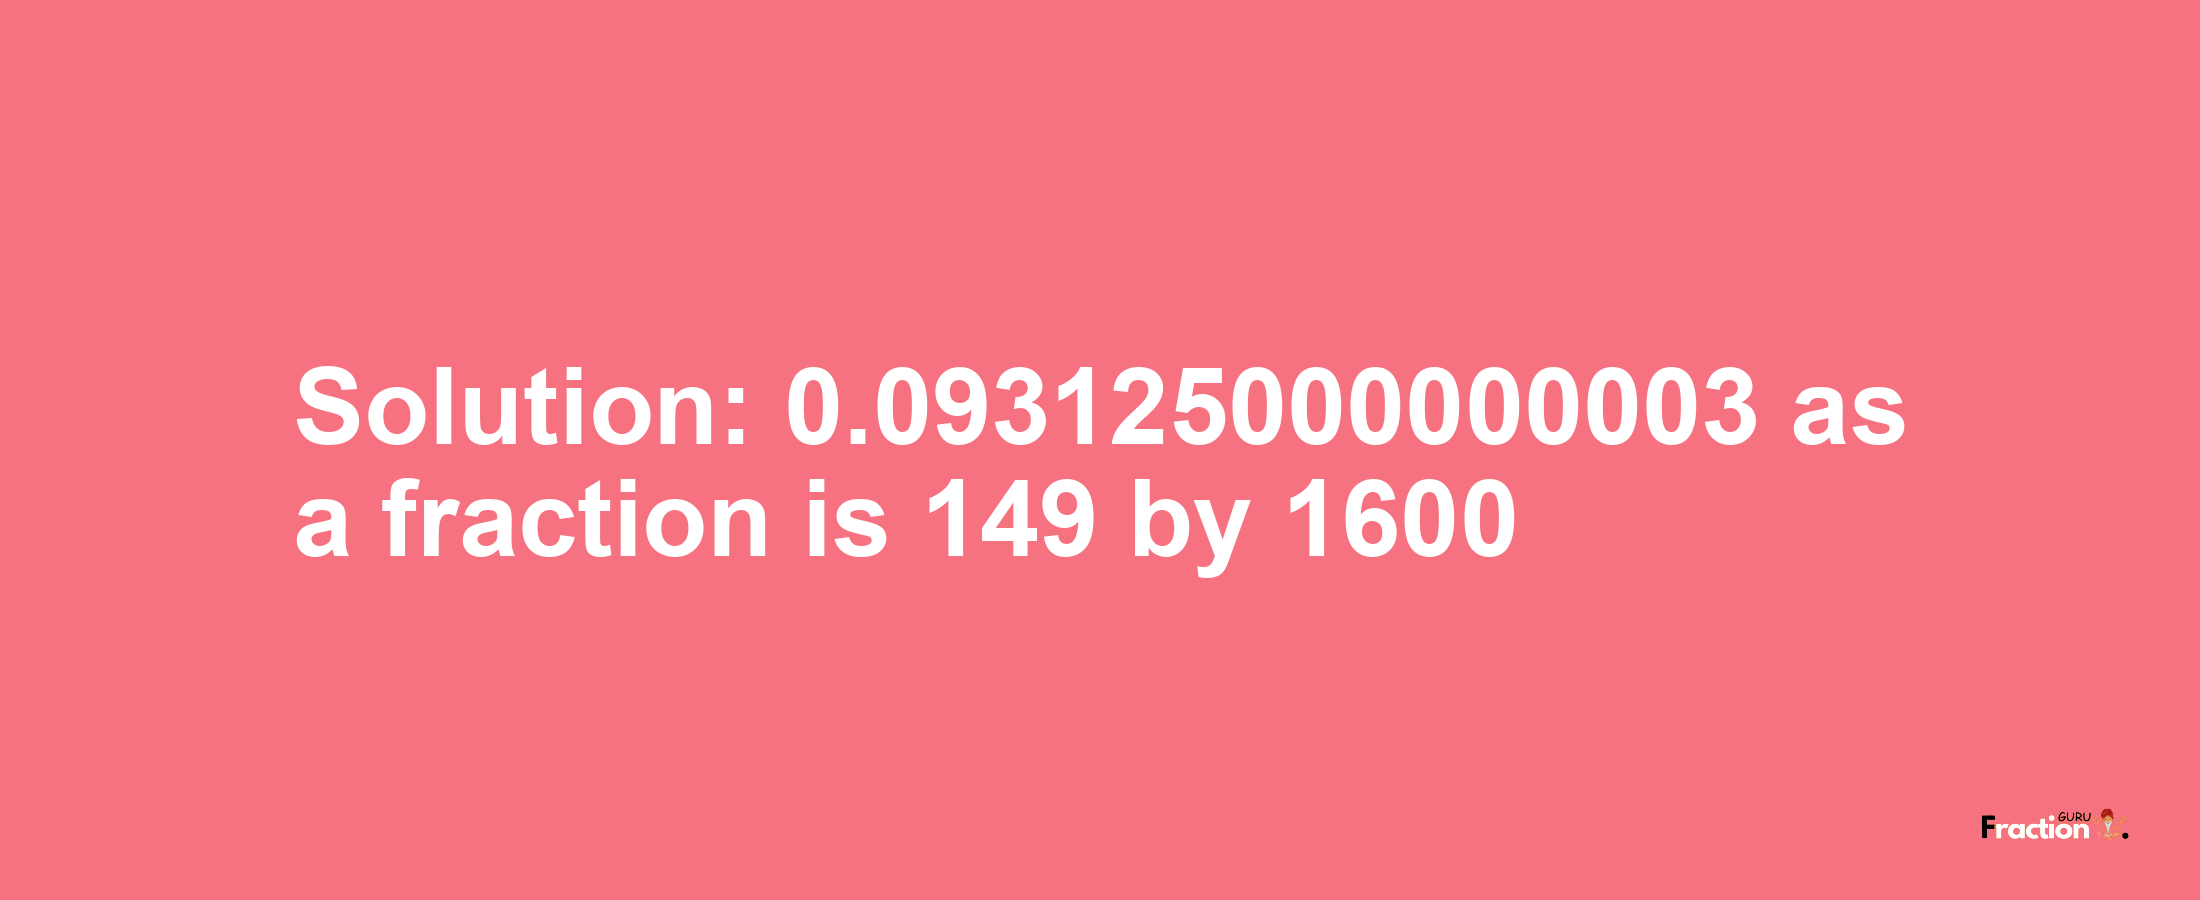 Solution:0.093125000000003 as a fraction is 149/1600